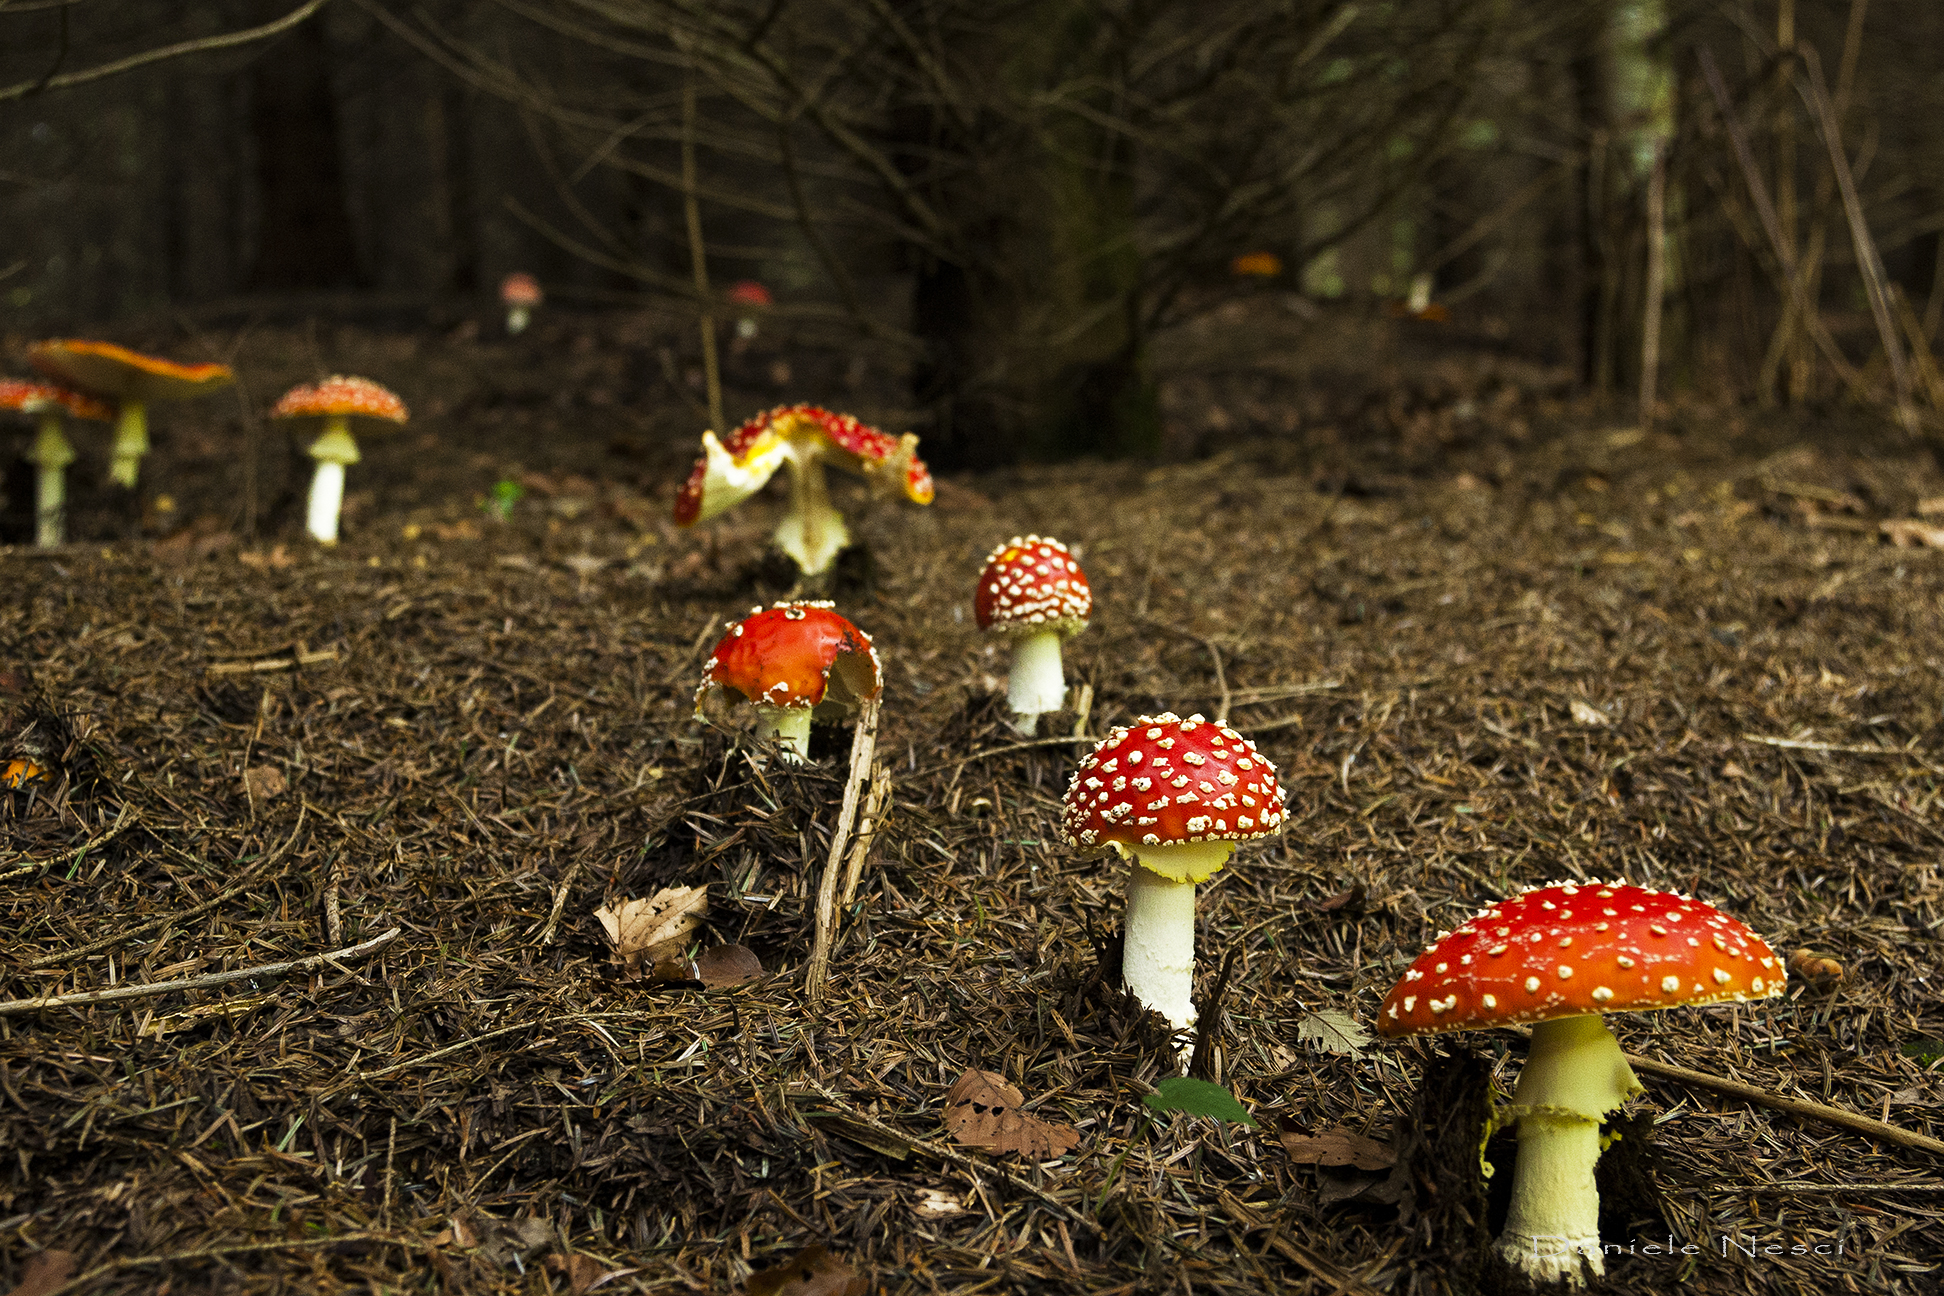 Amanita Muscaria in a group...